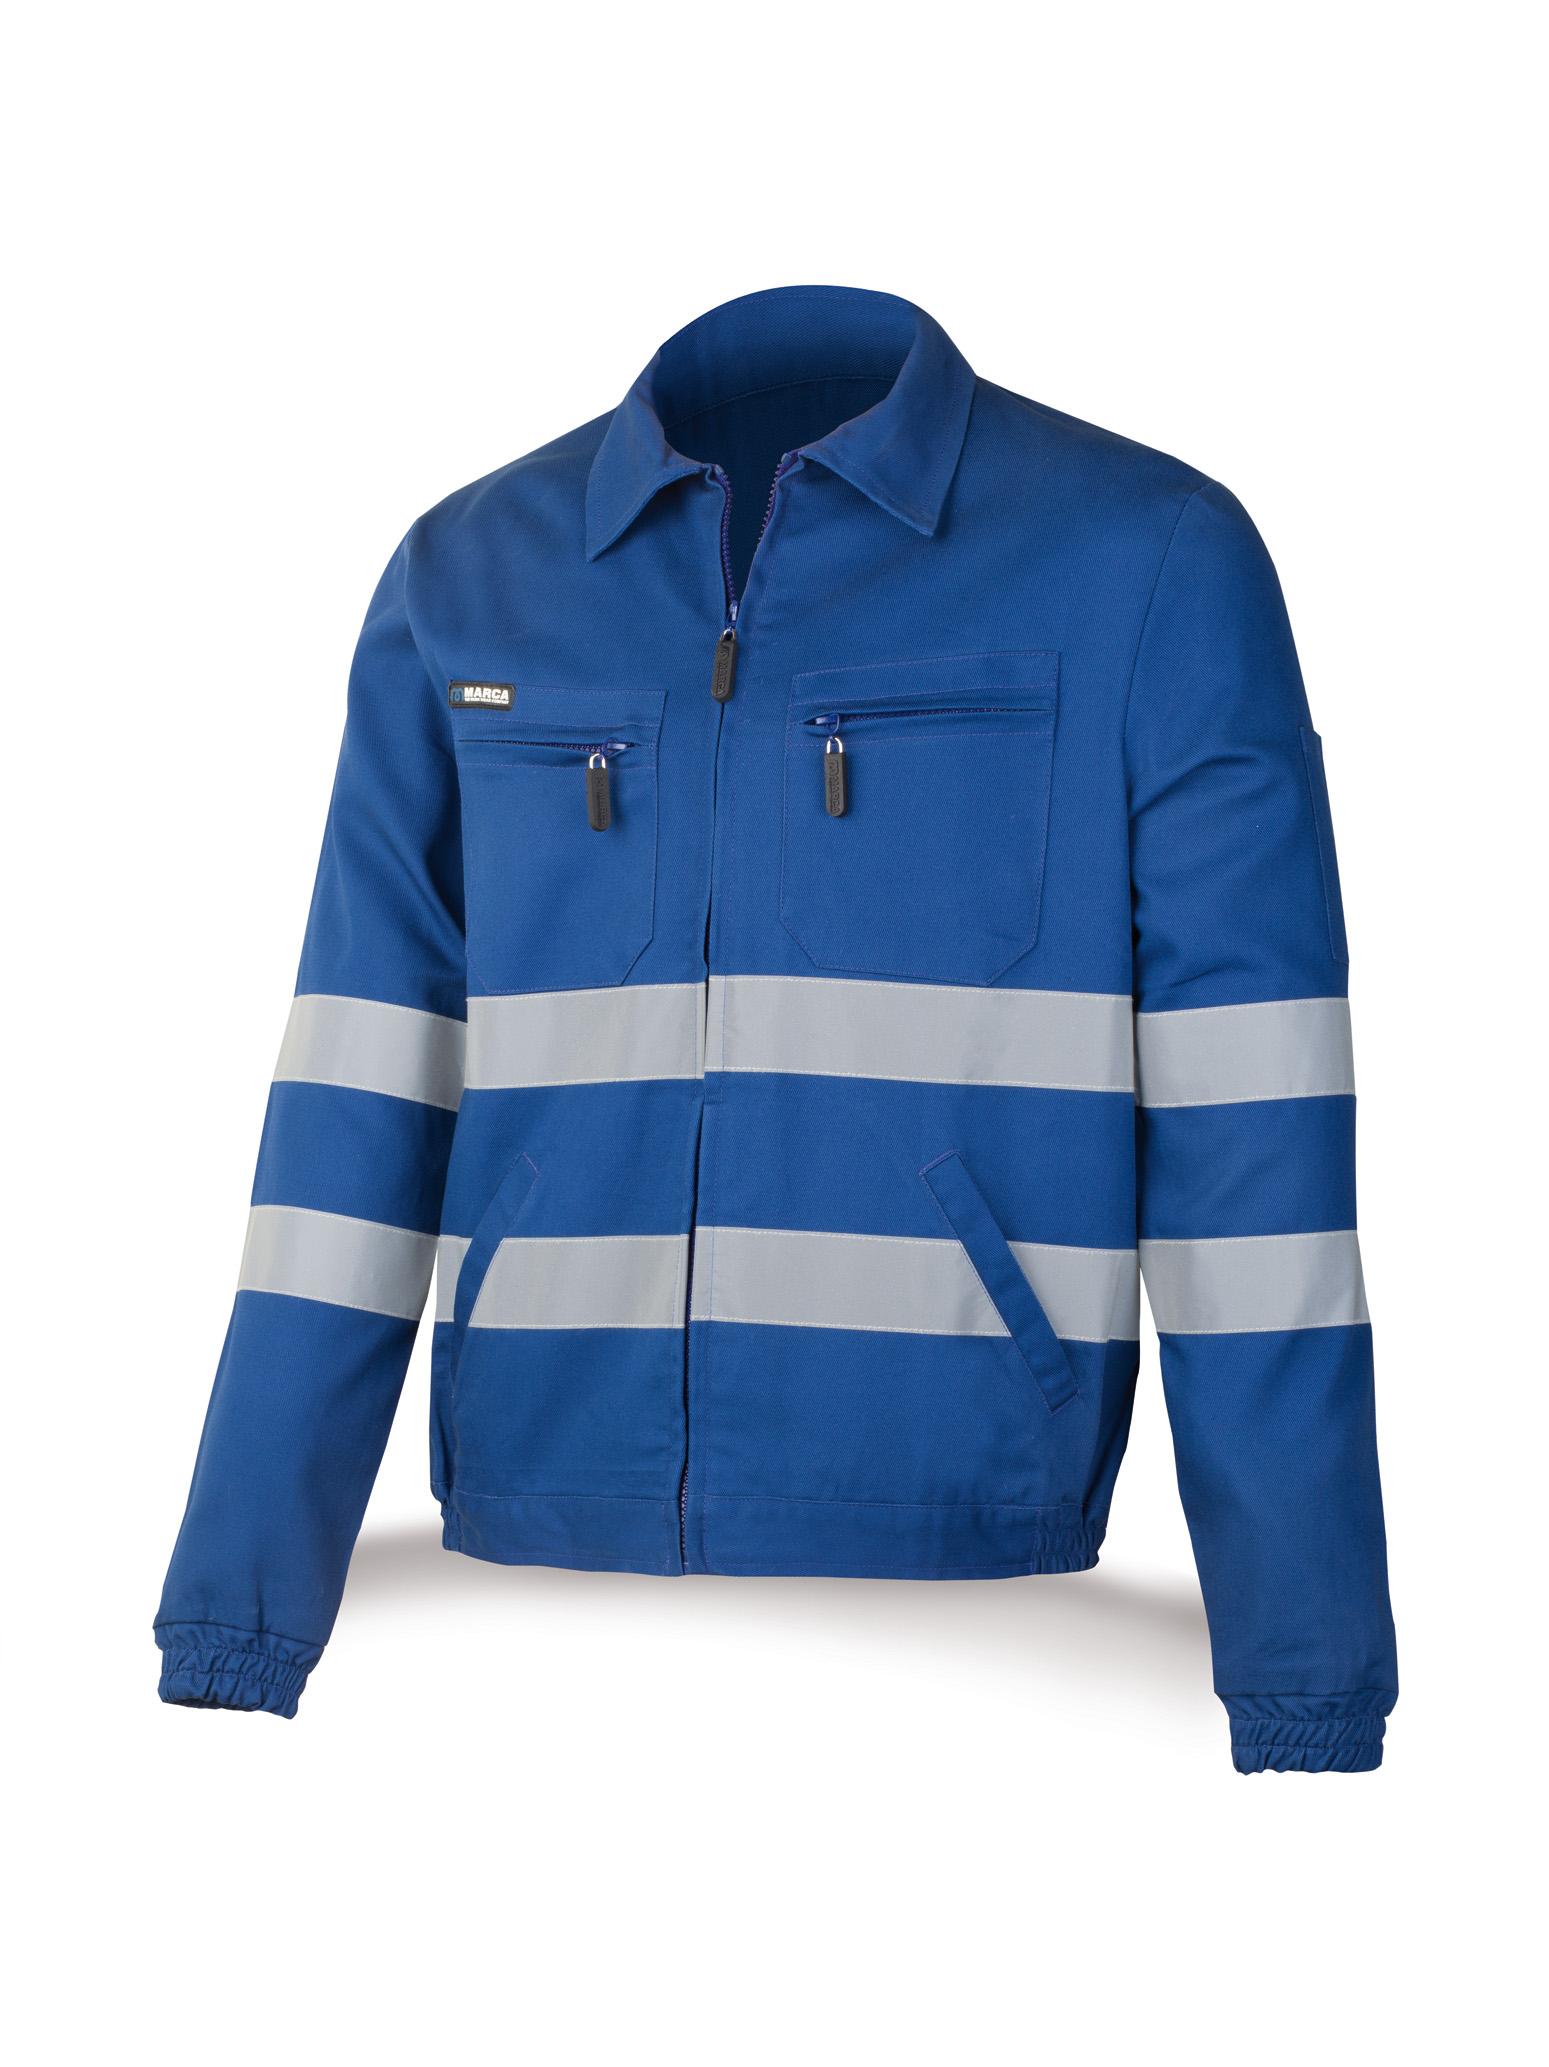 488-CCR Top Workwear Top Series Royal blue cotton jacket 245 gr. with reflective bands.